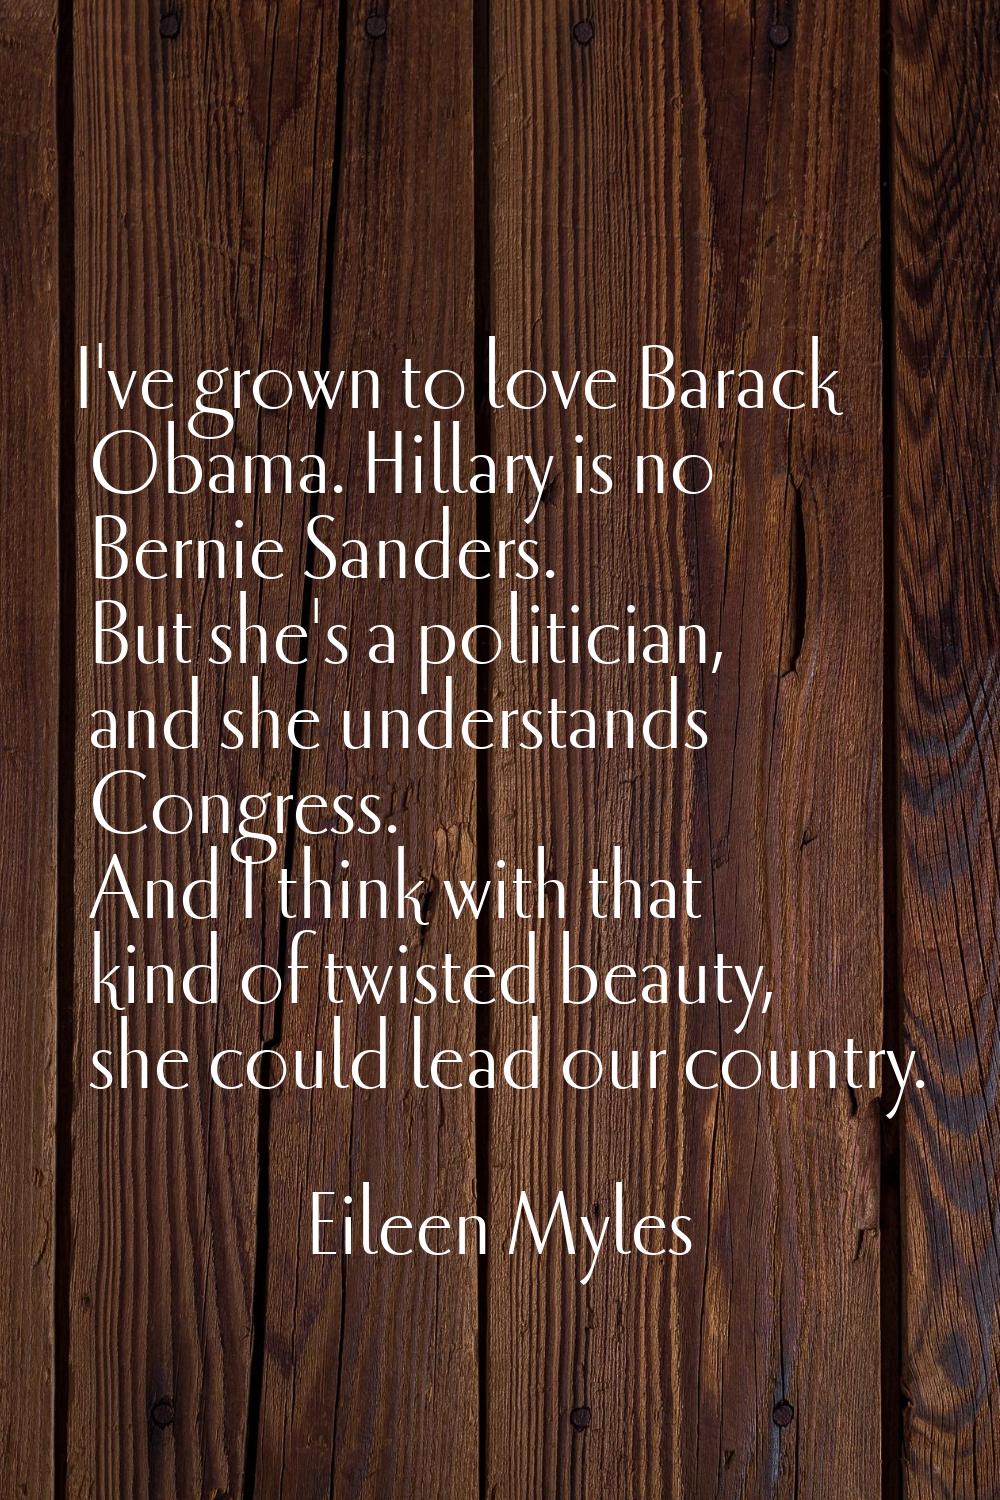 I've grown to love Barack Obama. Hillary is no Bernie Sanders. But she's a politician, and she unde